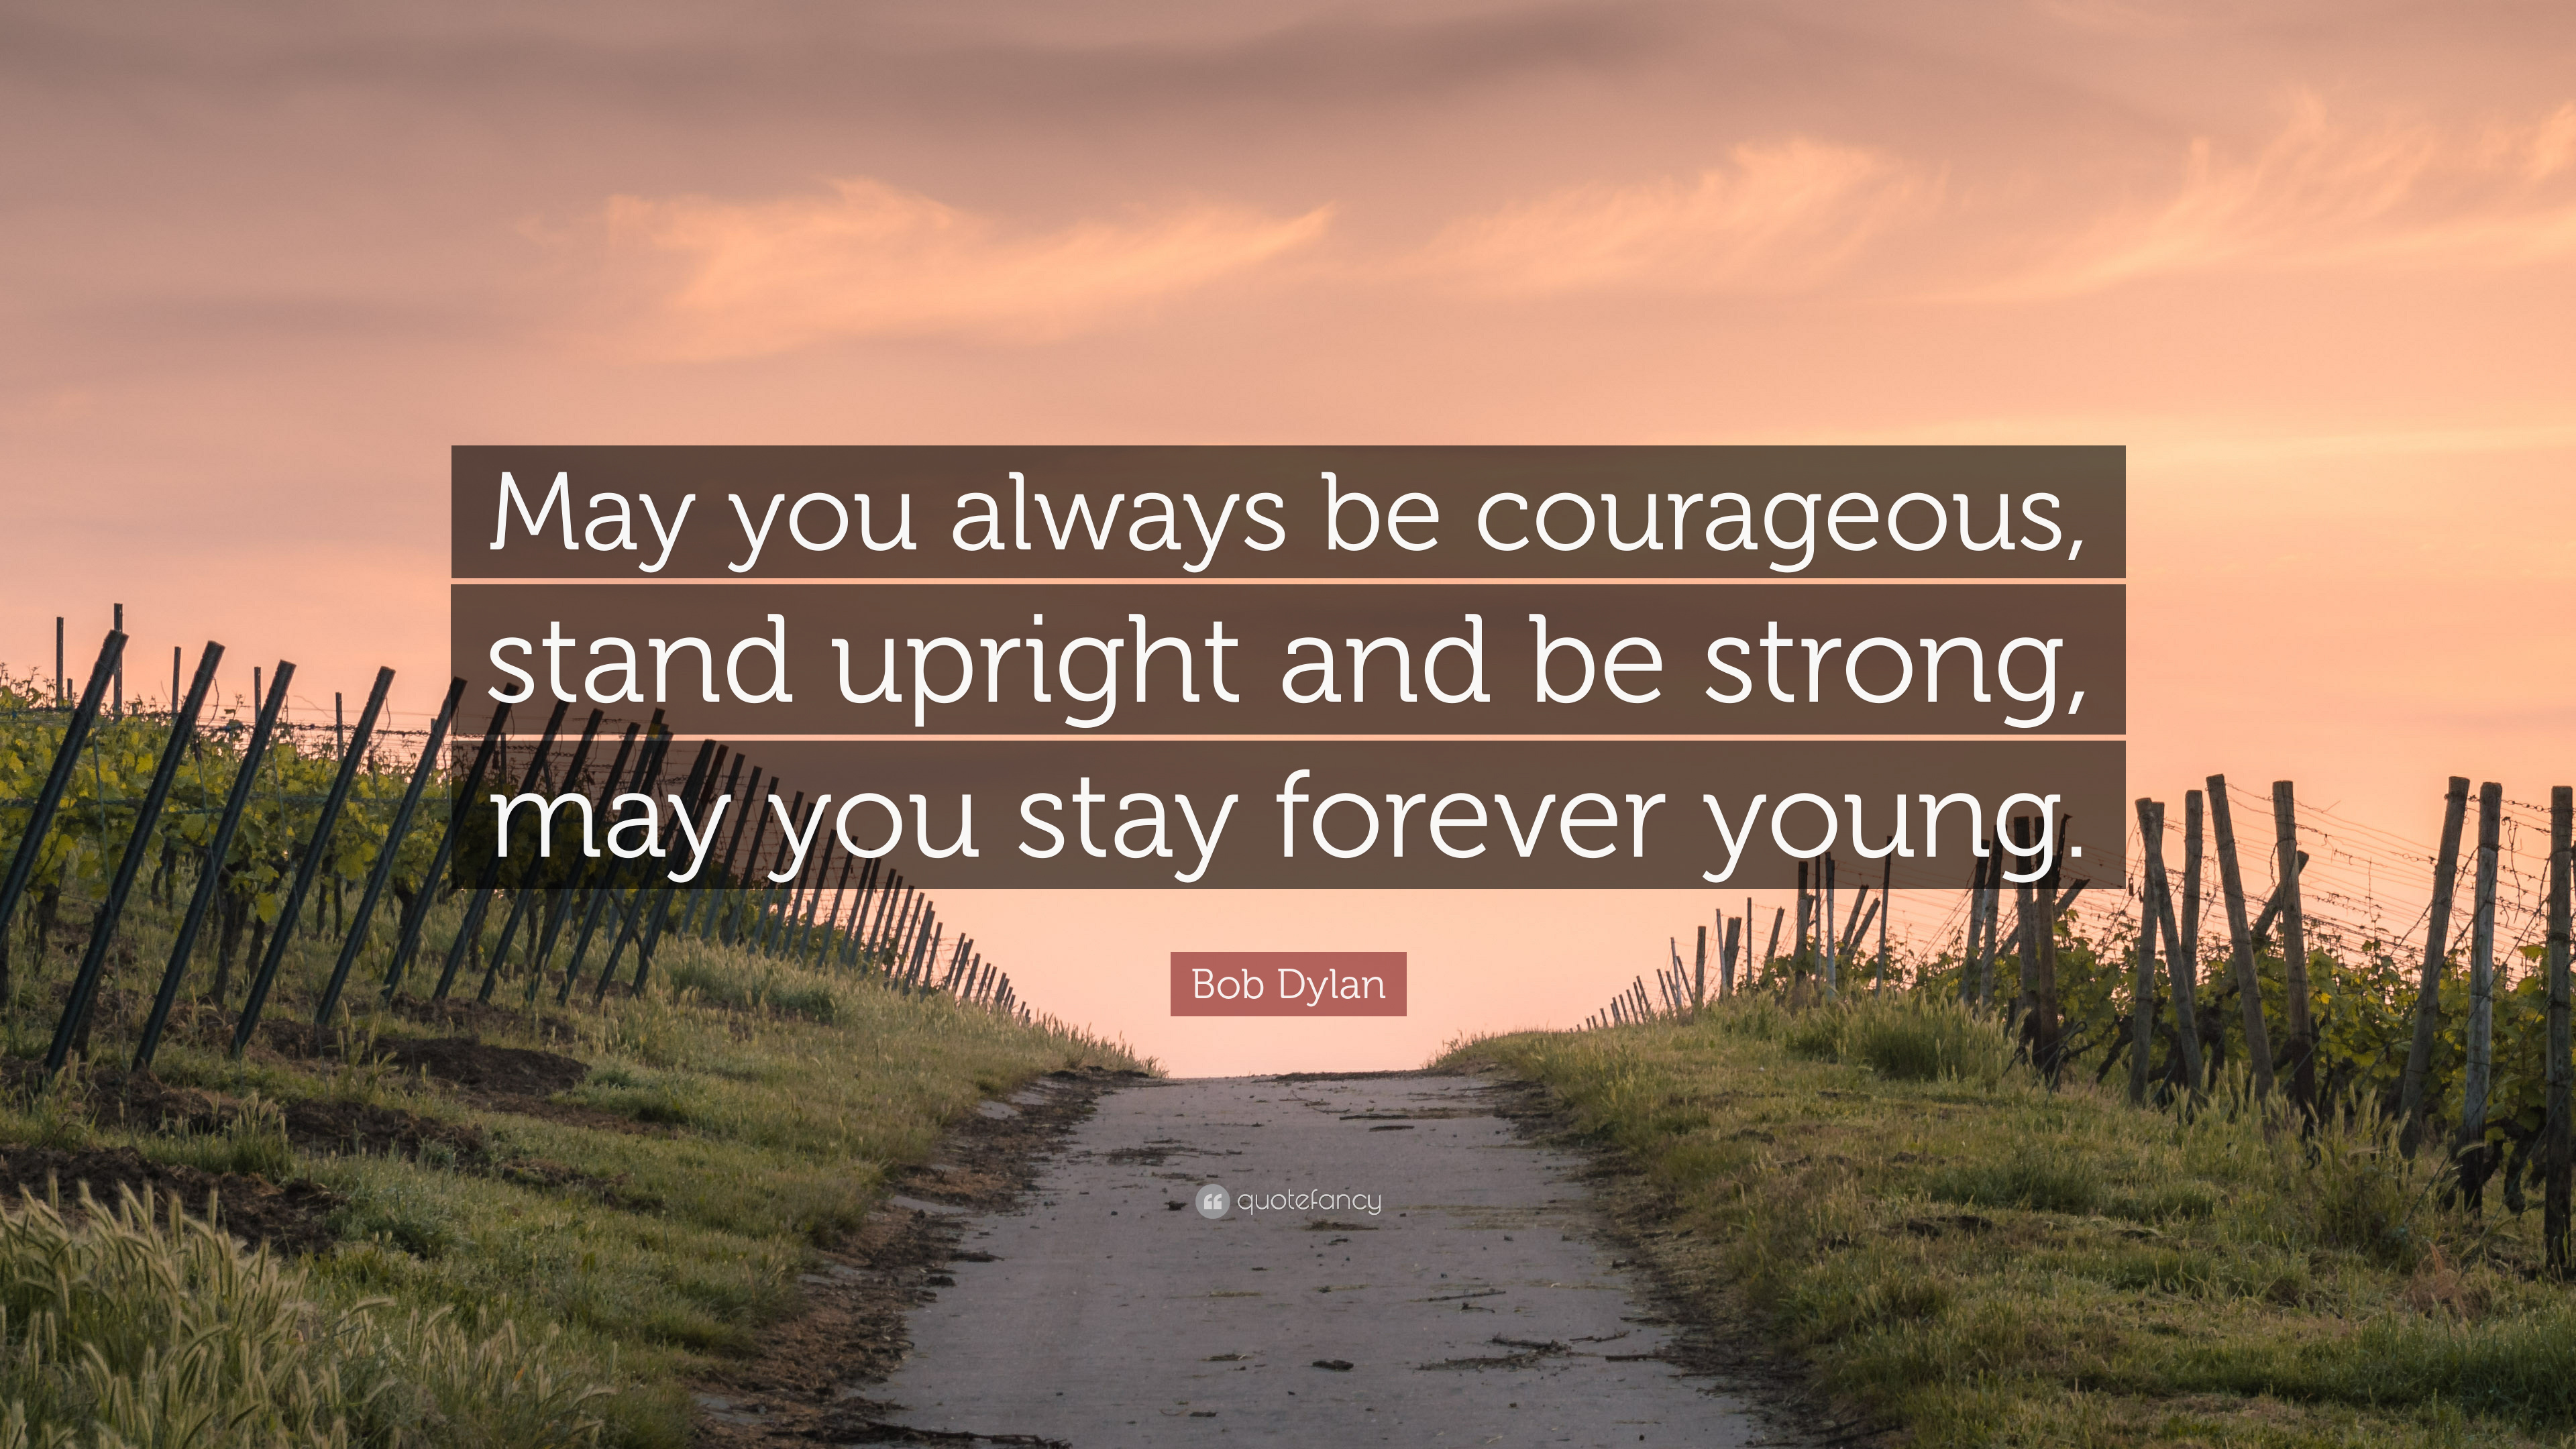 Bob Dylan Quote: “May you always be courageous, stand